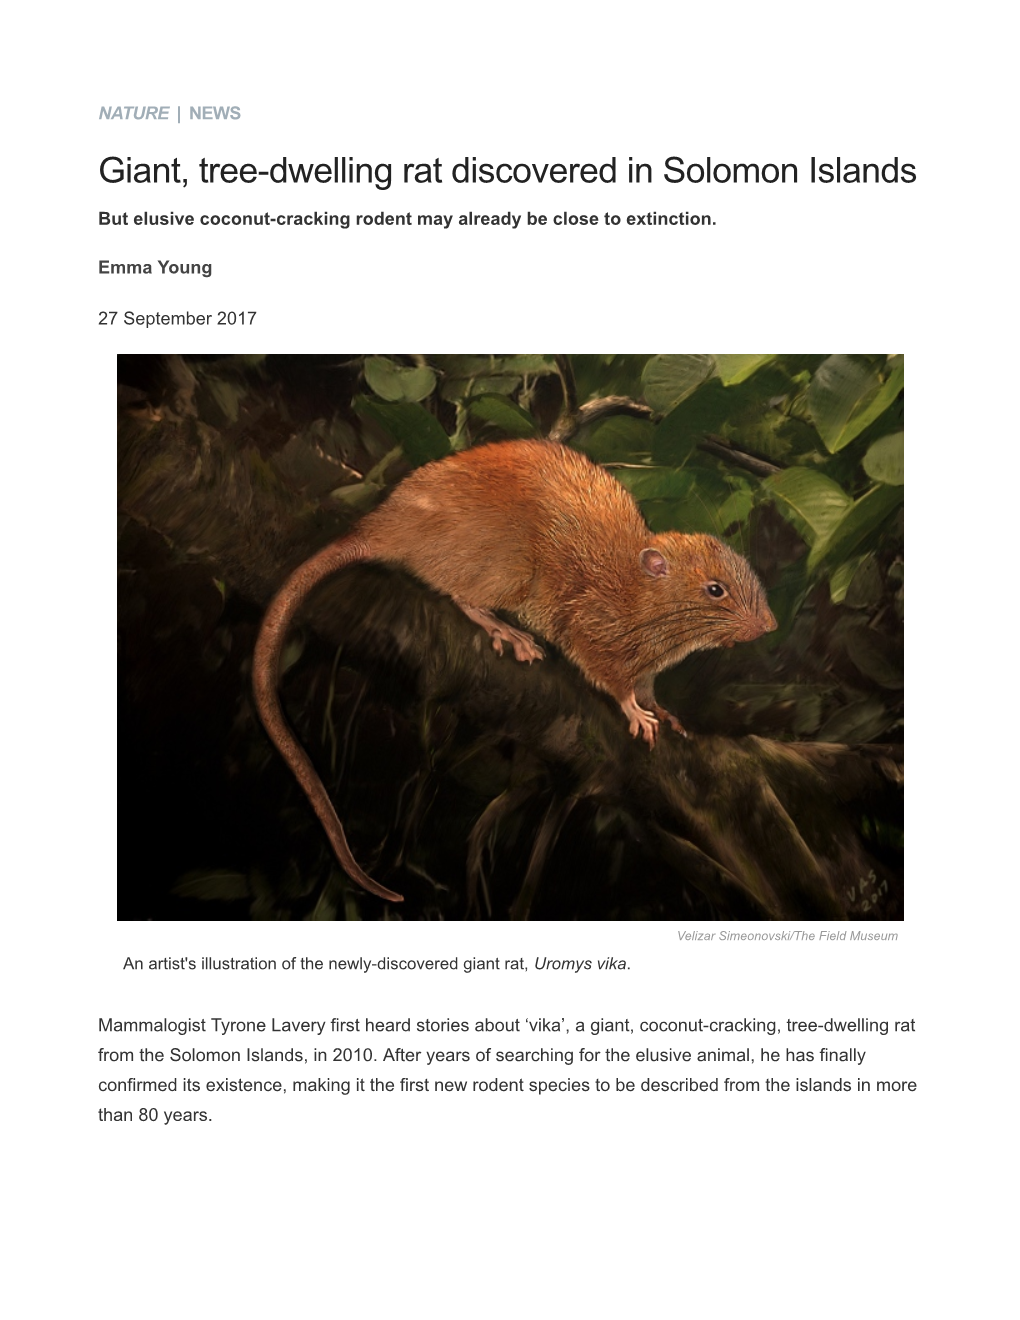 Giant, Tree-Dwelling Rat Discovered in Solomon Islands : Nature News